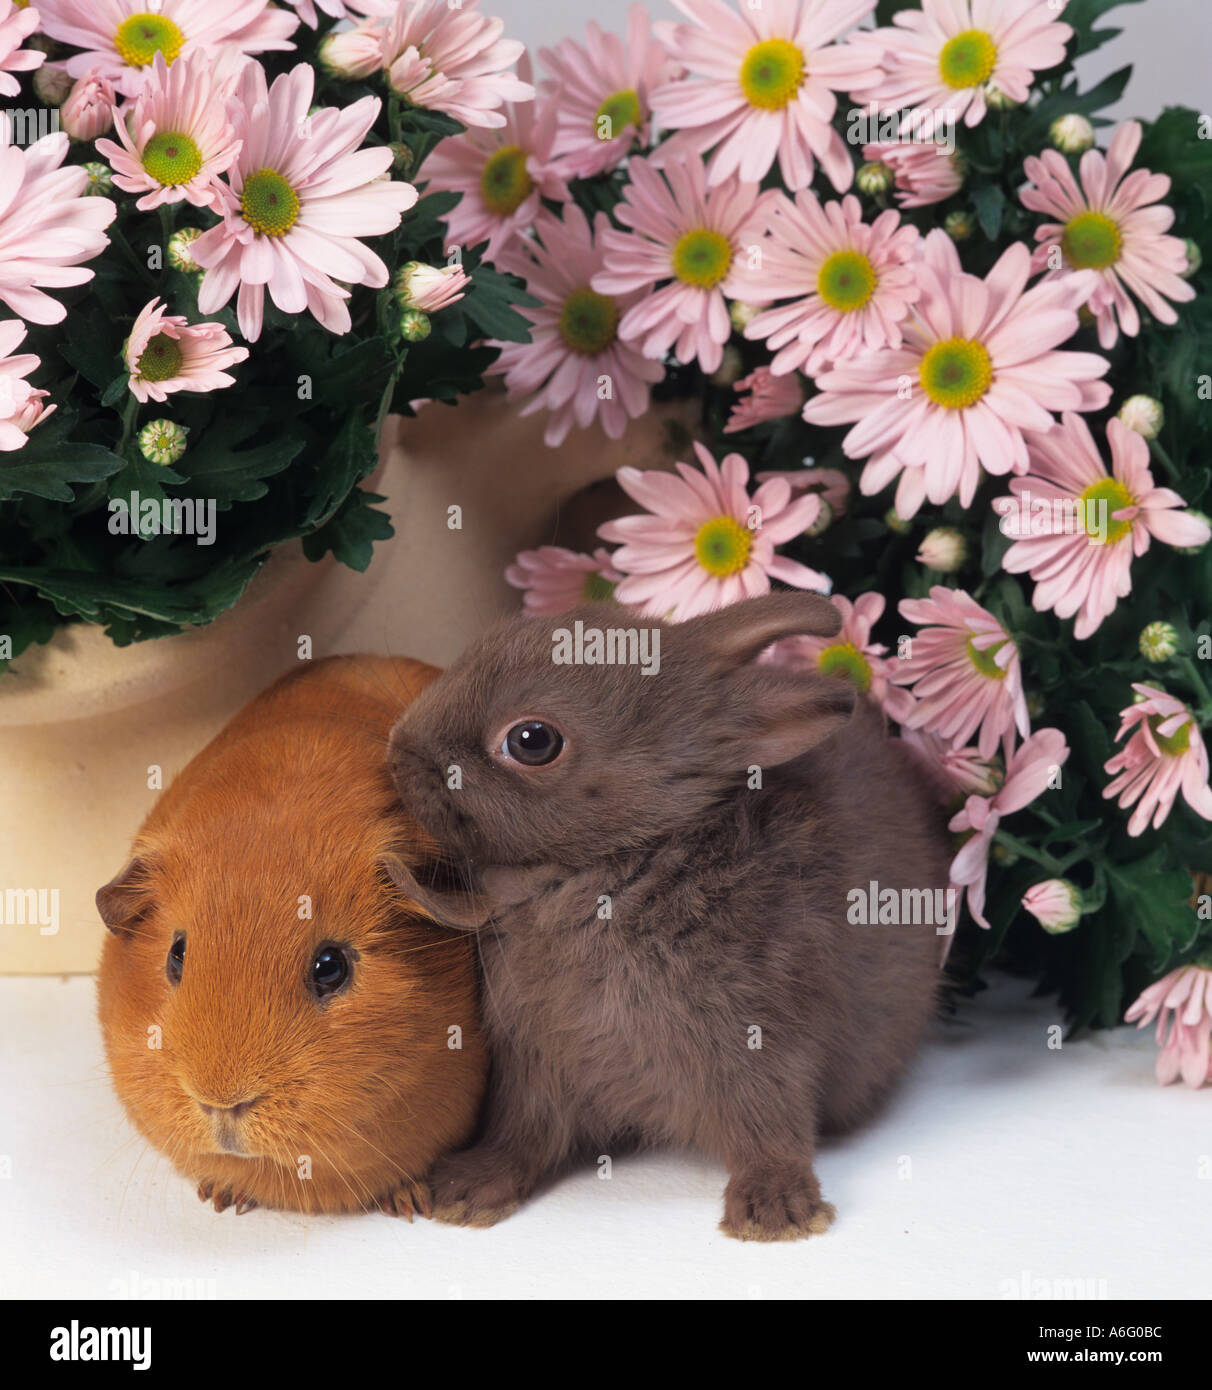 Rabbit and Pet Guinea Pig in flower setting Stock Photo